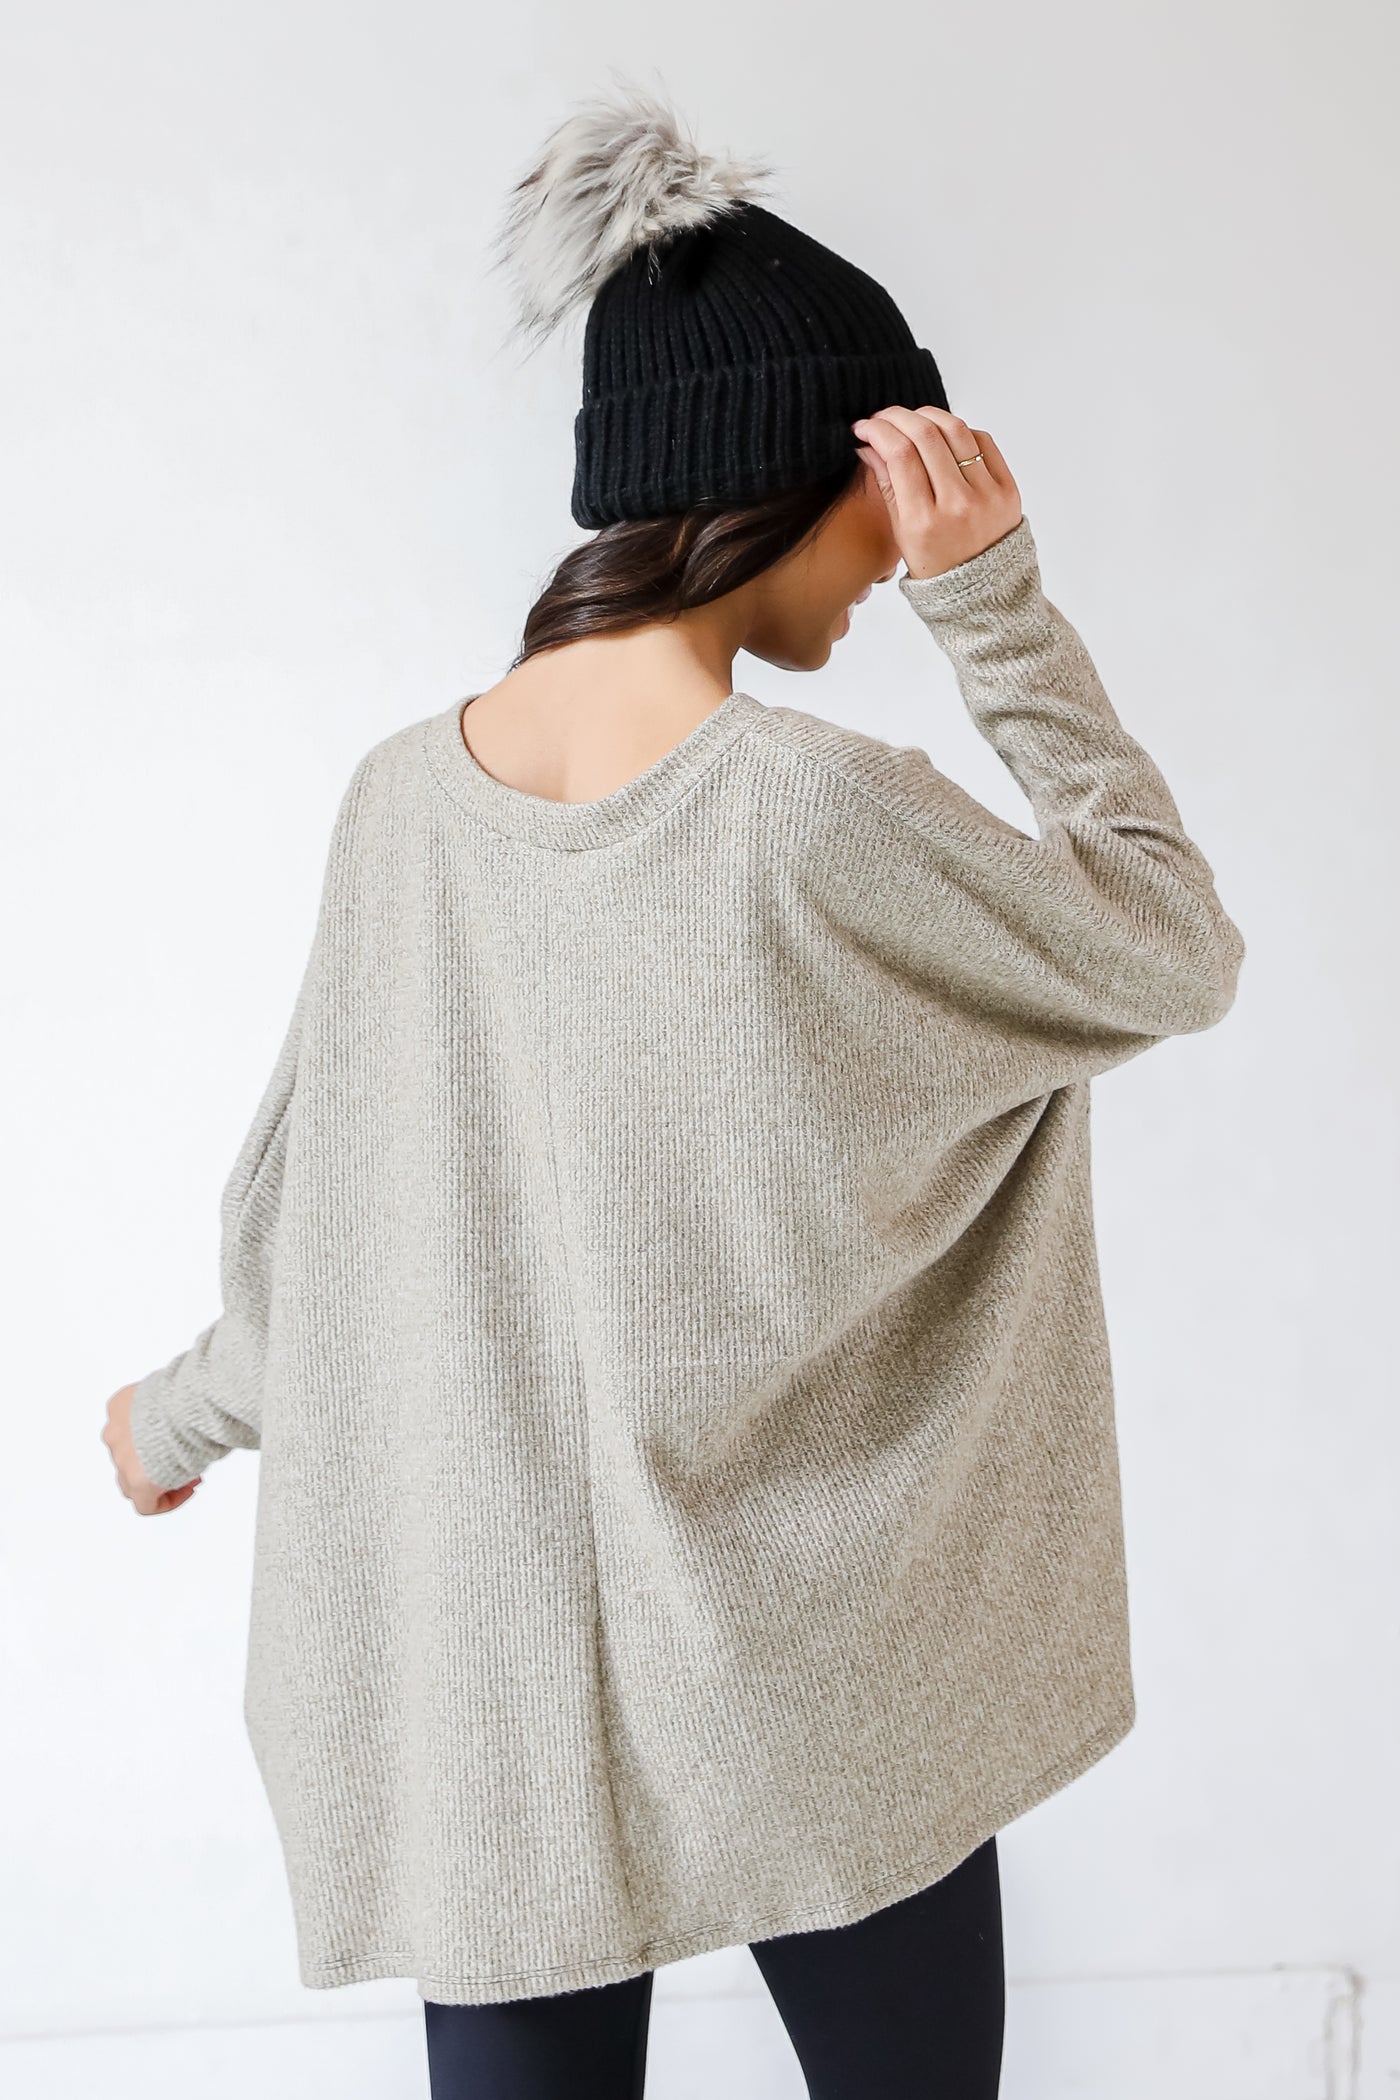 Oversized Sweater in olive back view